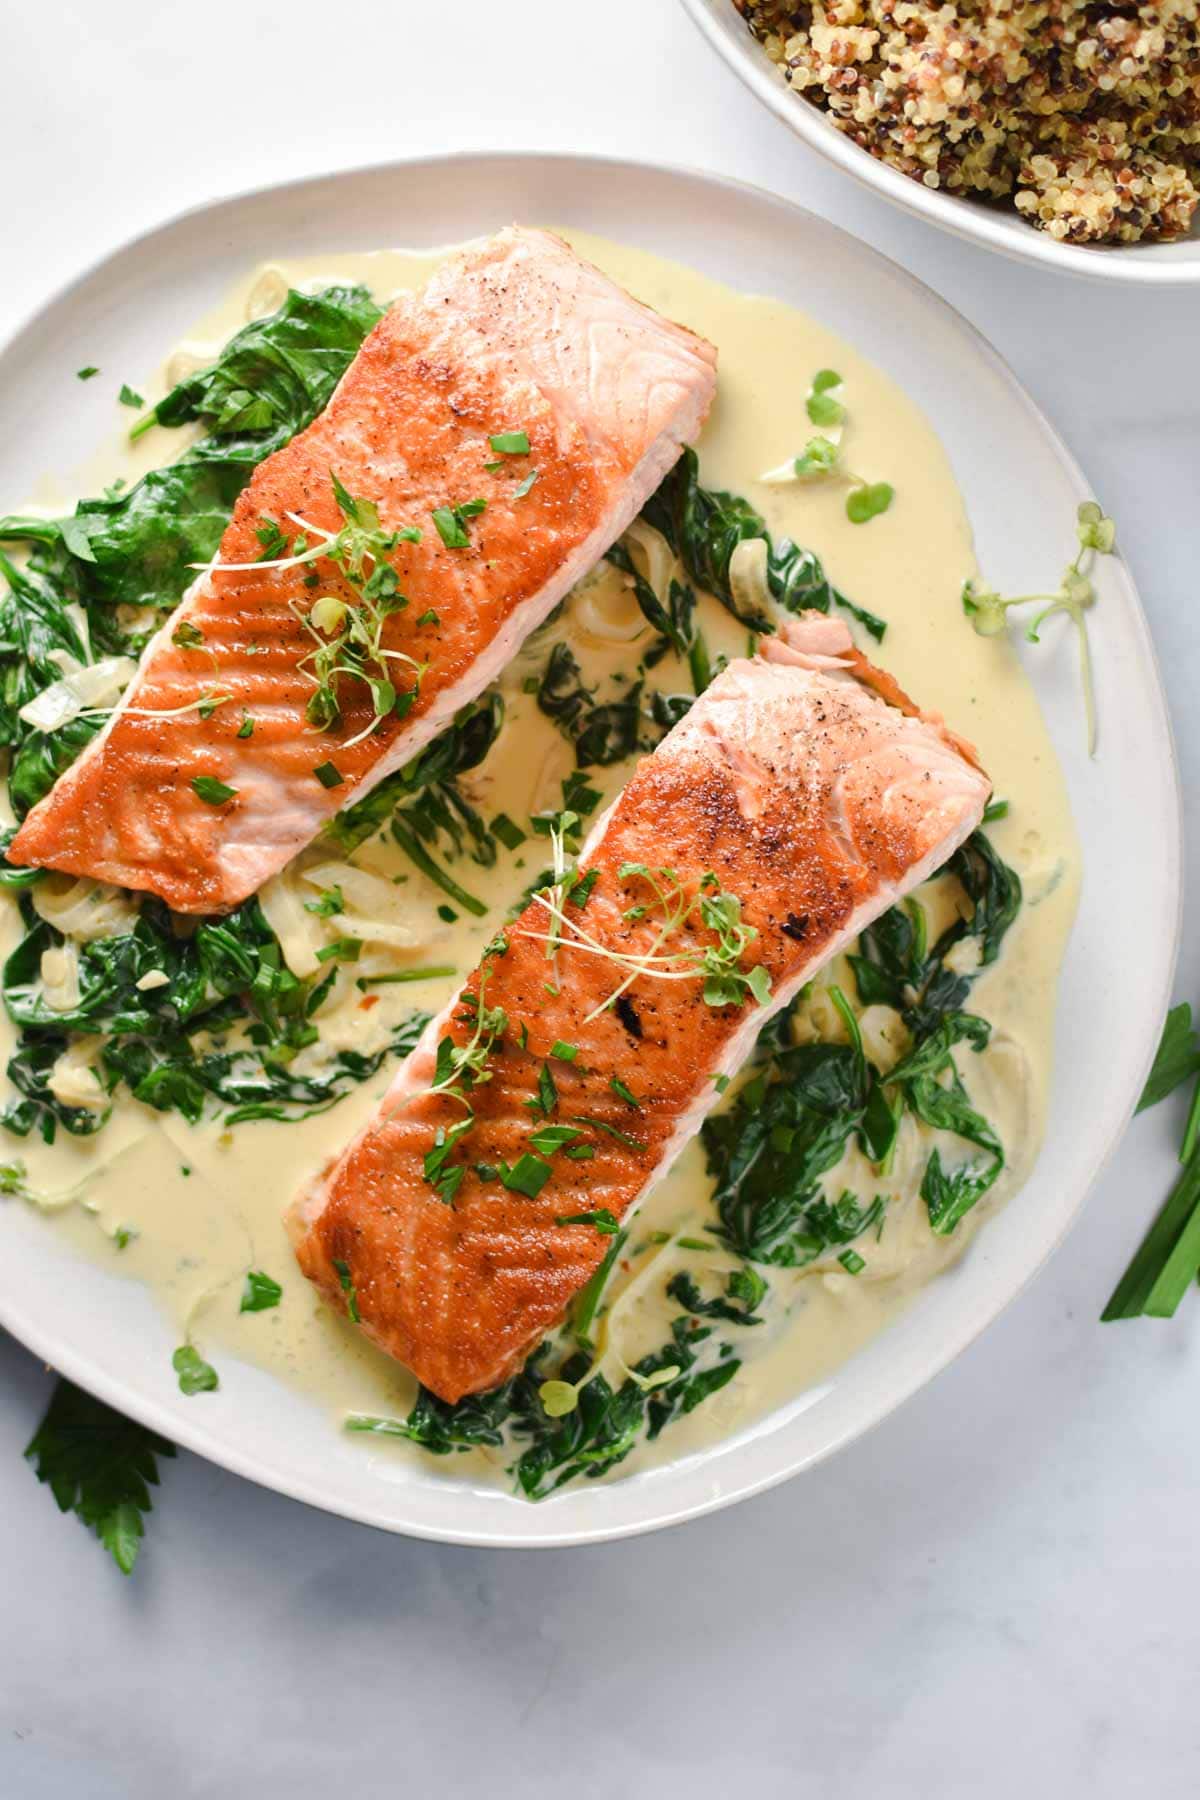 Two filets of salmon on top of spinach surrounded by a creamy sauce next to a bowl of quinoa.